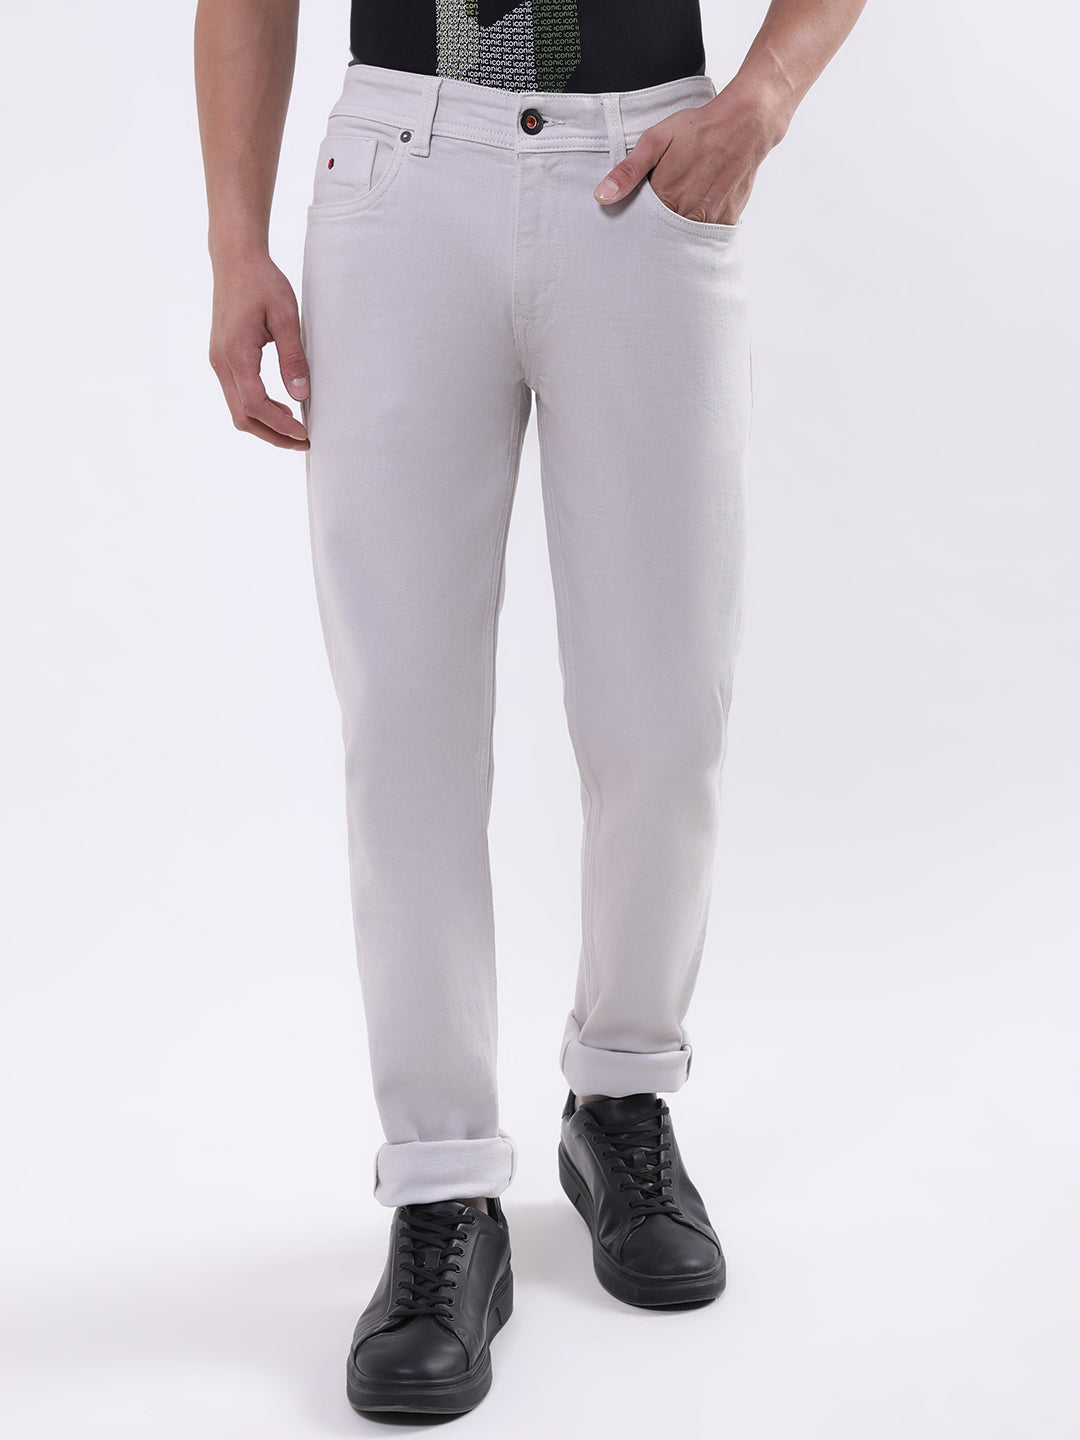 Iconic Men Grey Embroidered Slim Fit Jeans